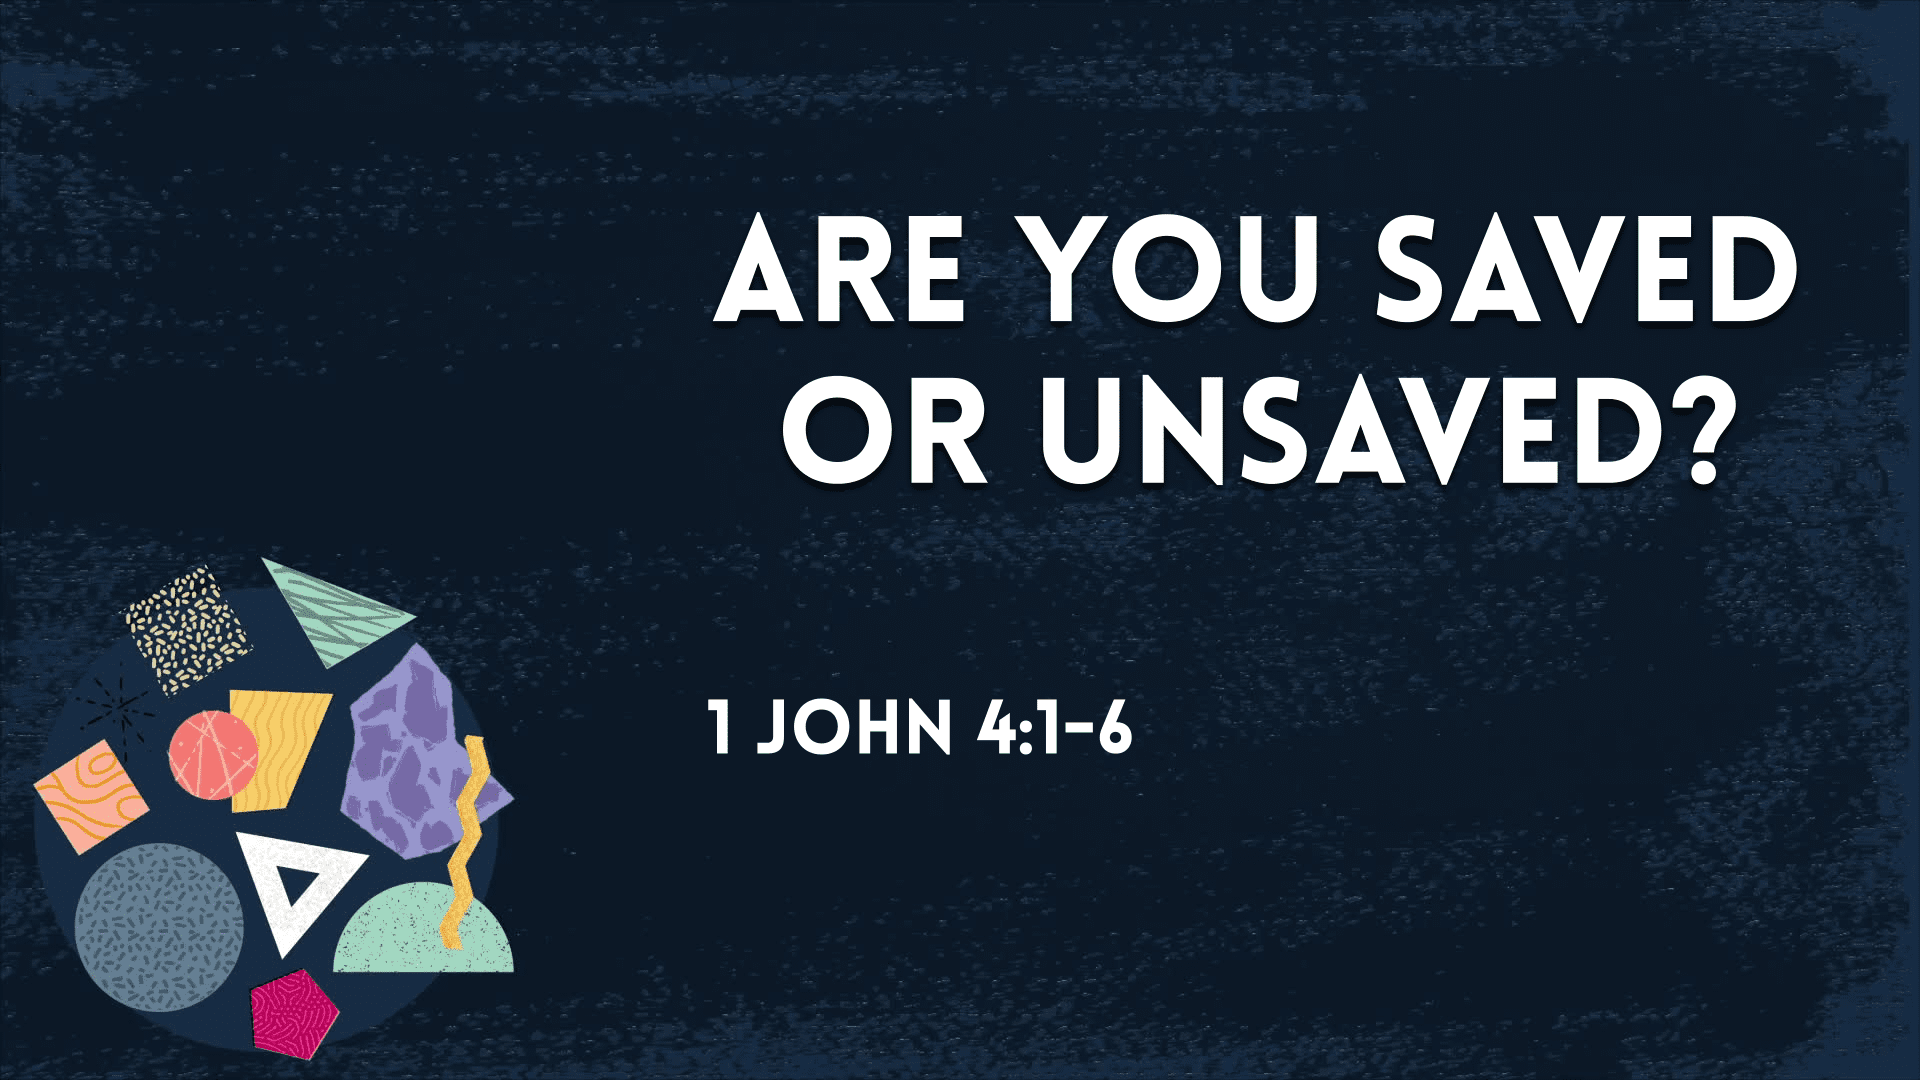 Are You Saved or Unsaved?